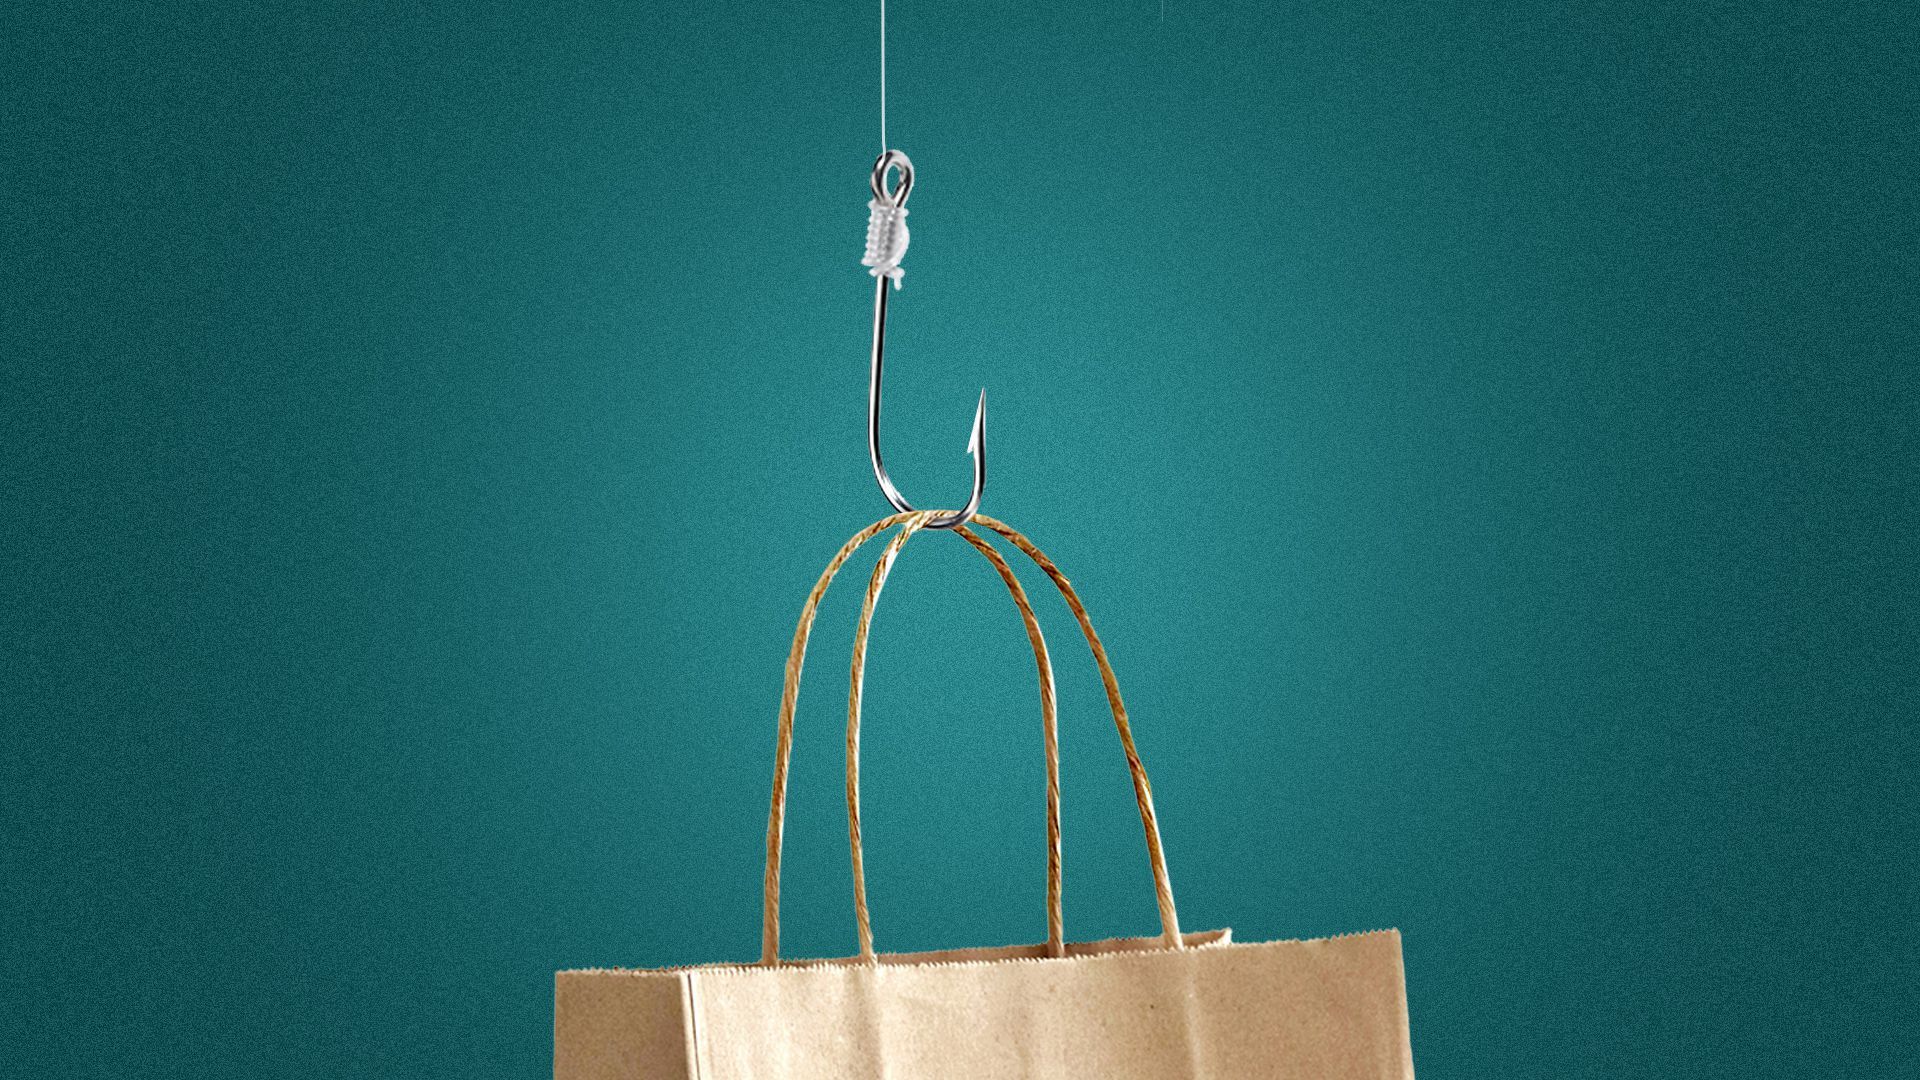 Illustration of a paper bag with handles held by a fishing hook on a line